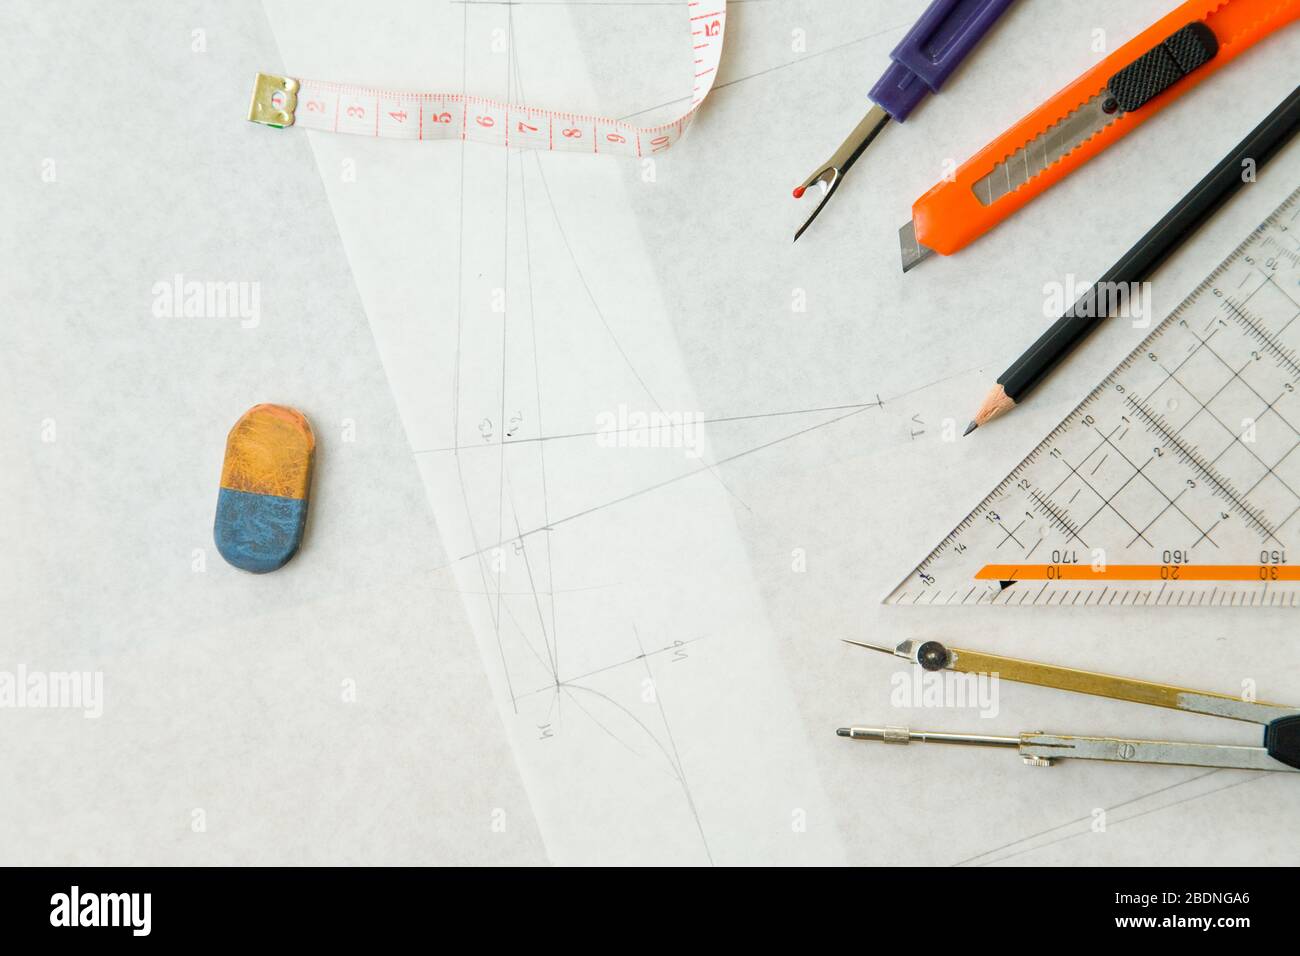 A fashion designer's tools such as pencil and compass on sewing pattern Stock Photo